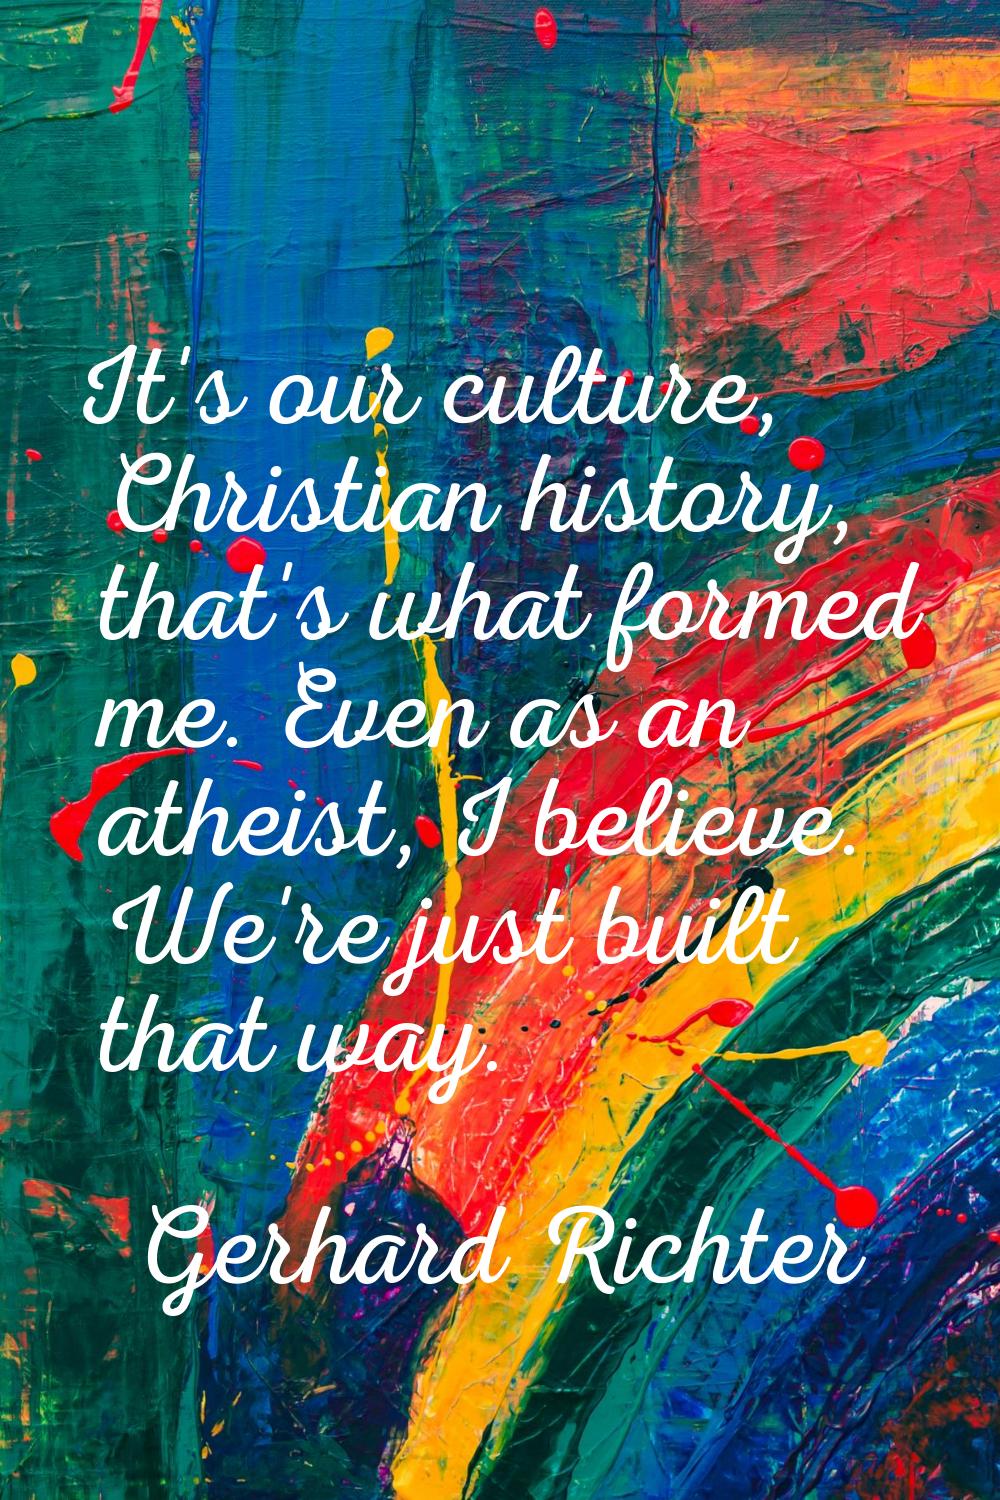 It's our culture, Christian history, that's what formed me. Even as an atheist, I believe. We're ju